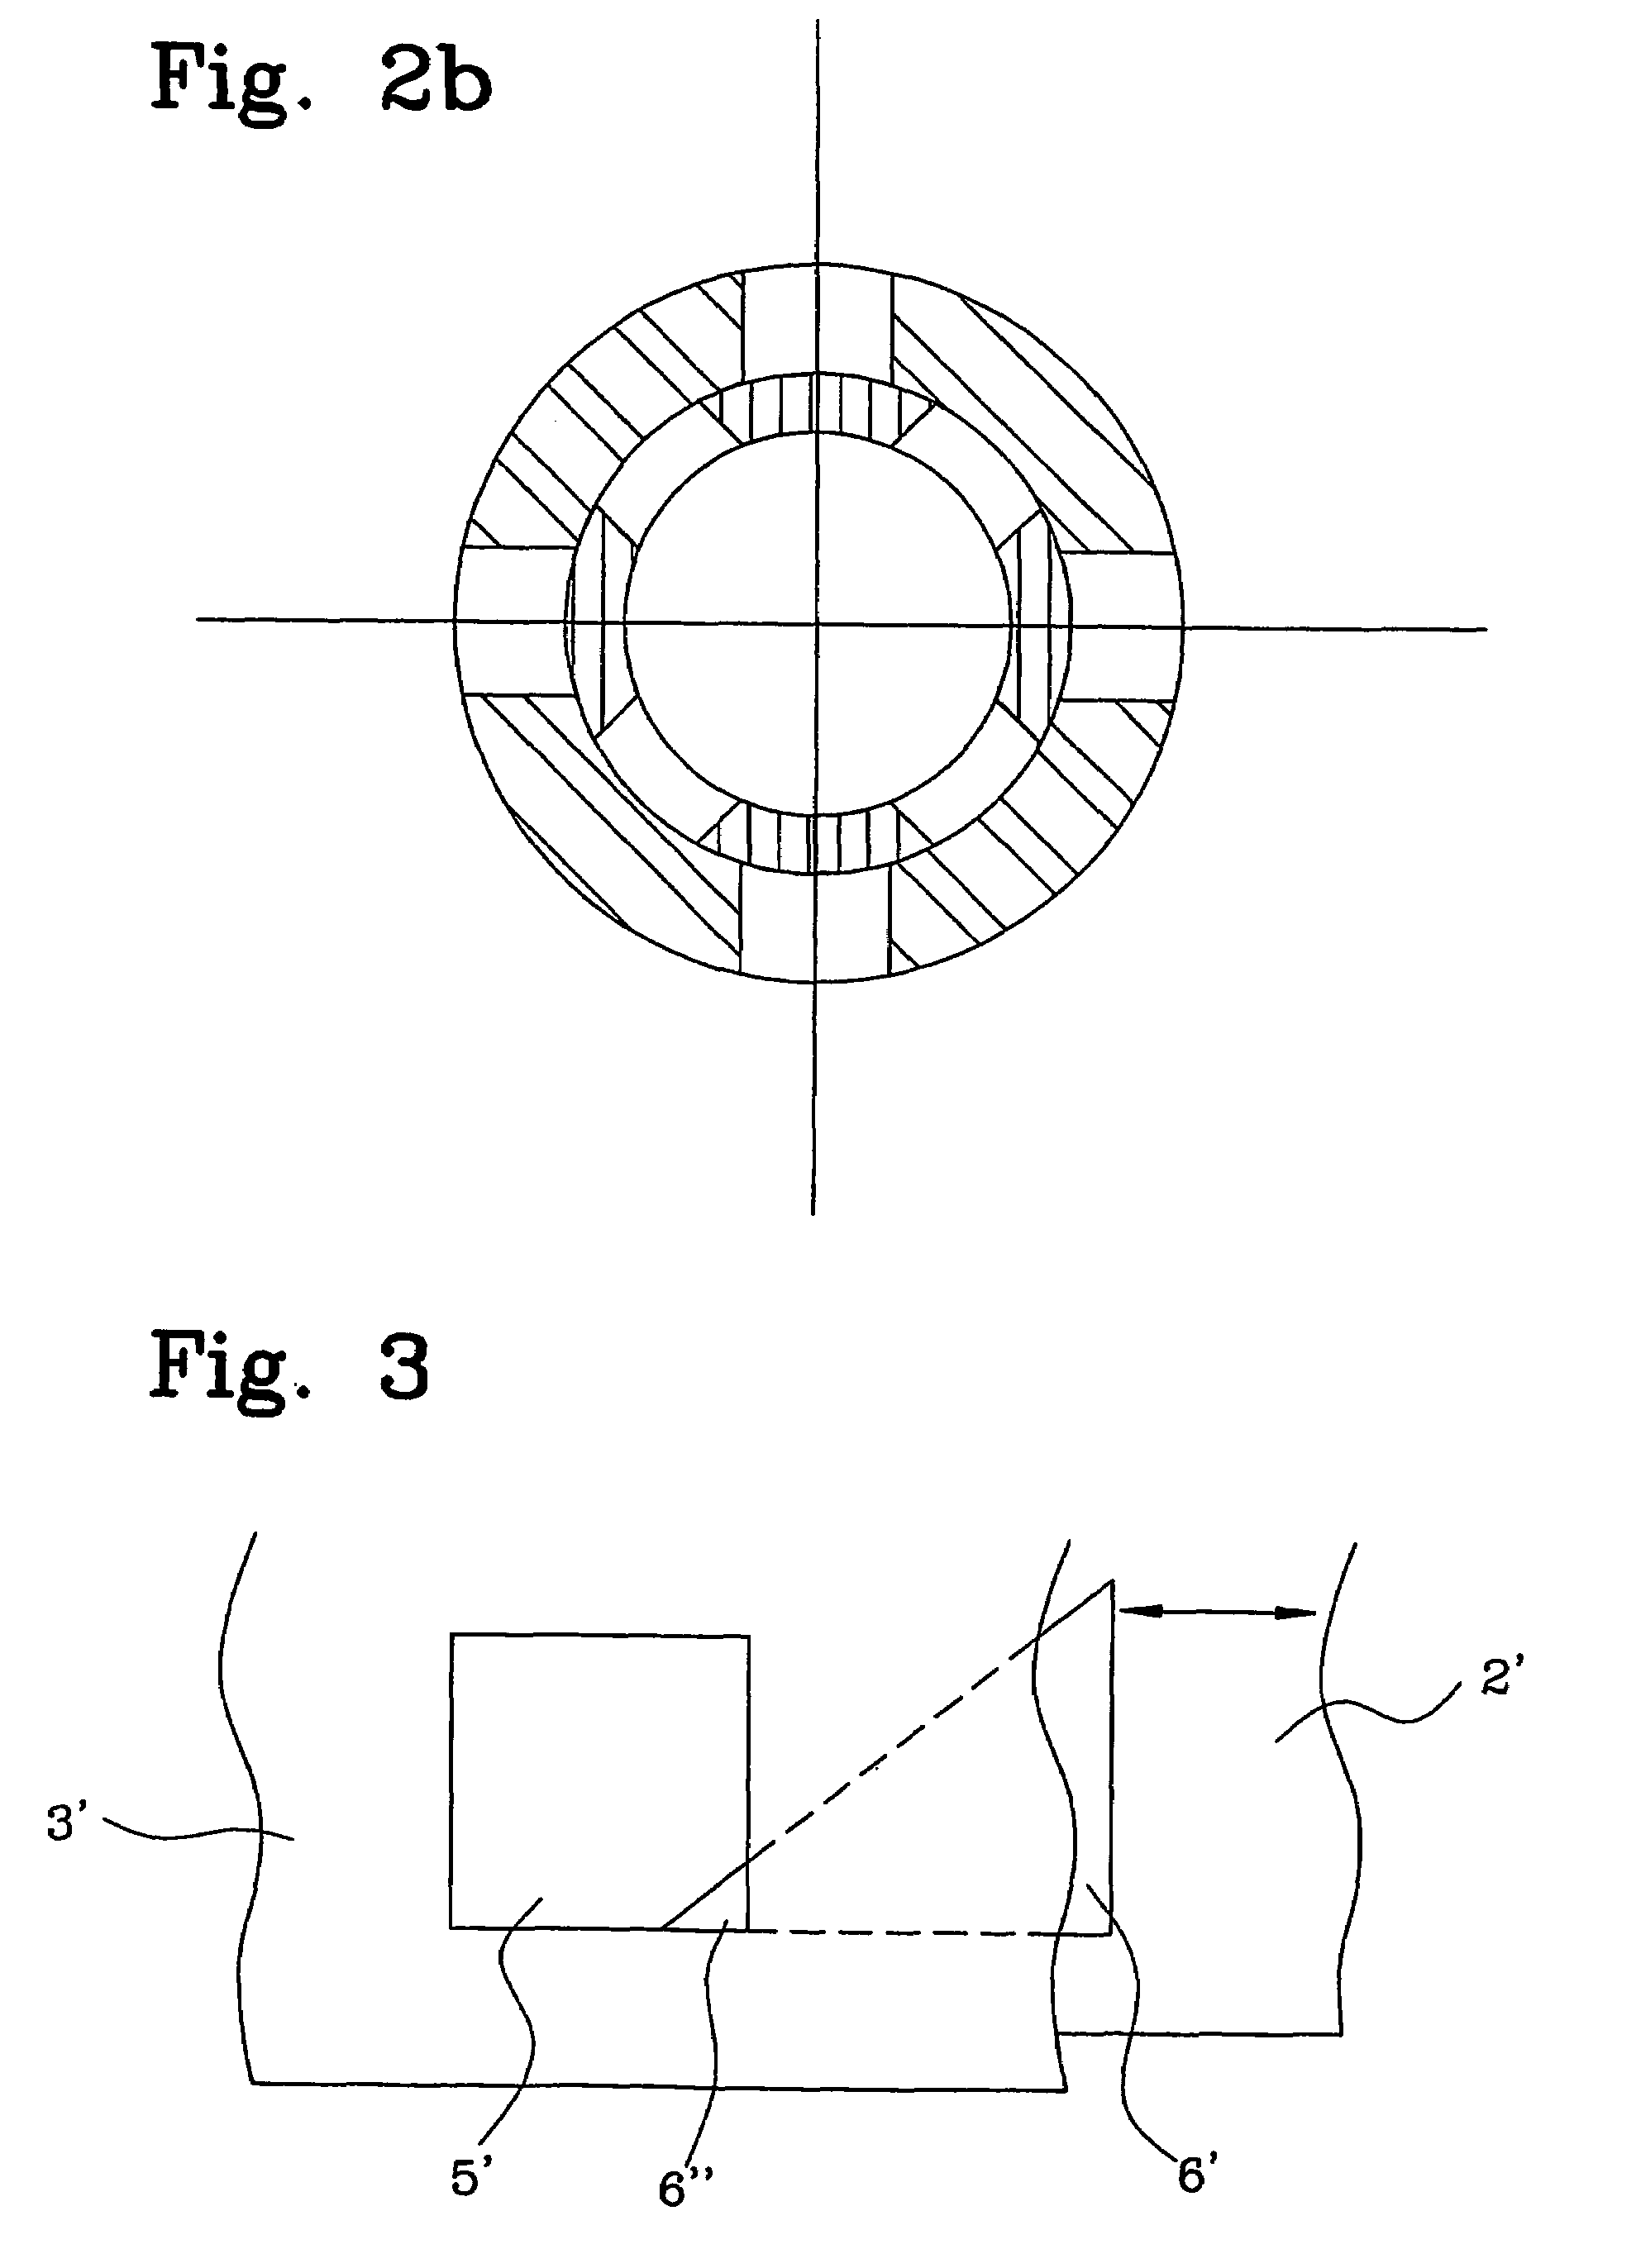 Liquid flow regulating device and dynamometer testing device